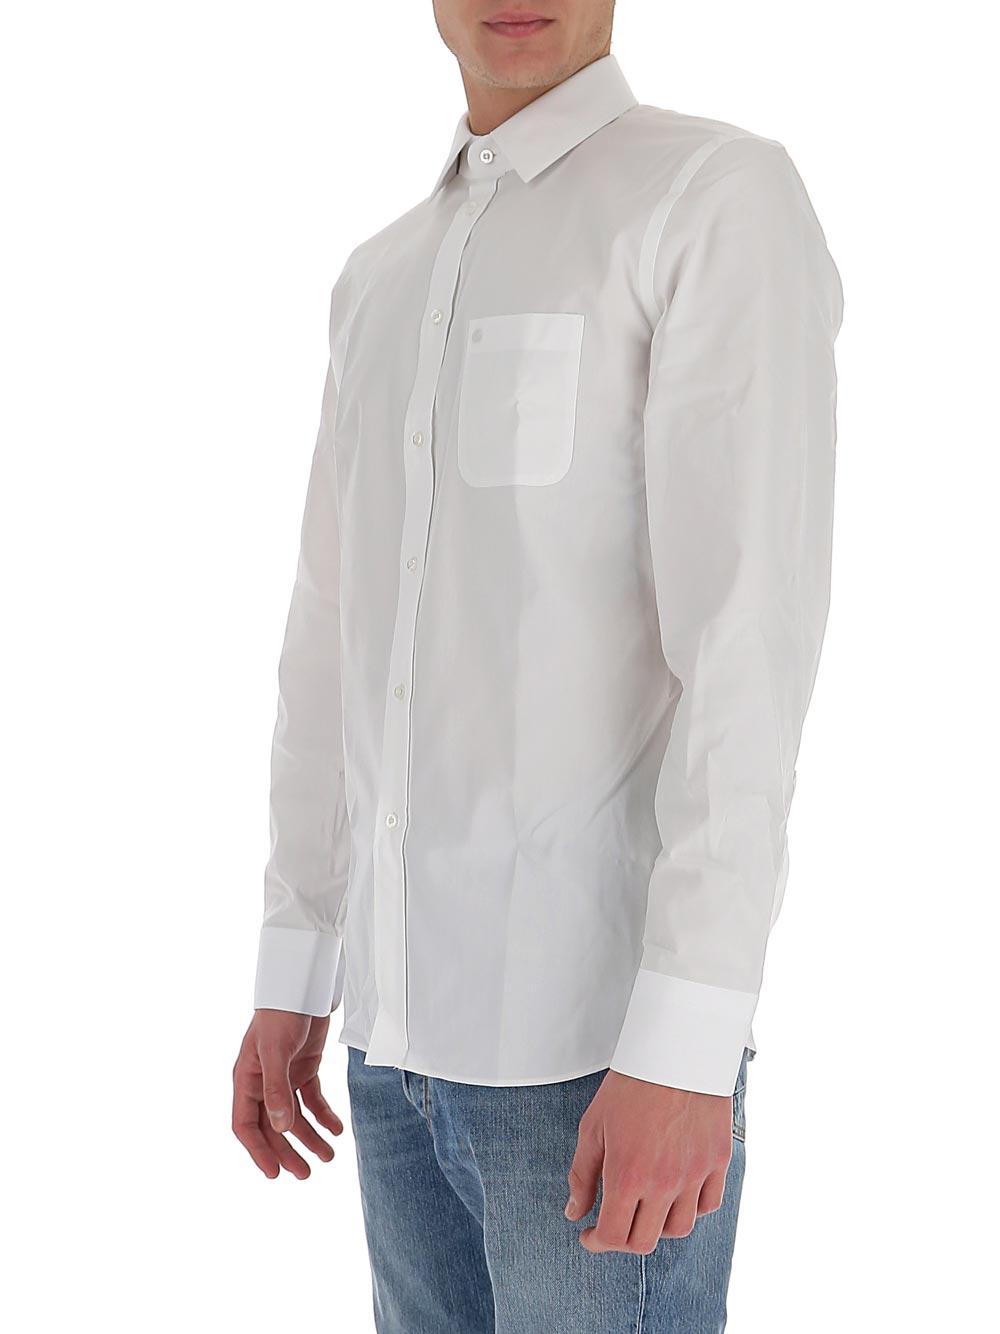 Gucci Cotton Button-up Shirt in White for Men - Lyst